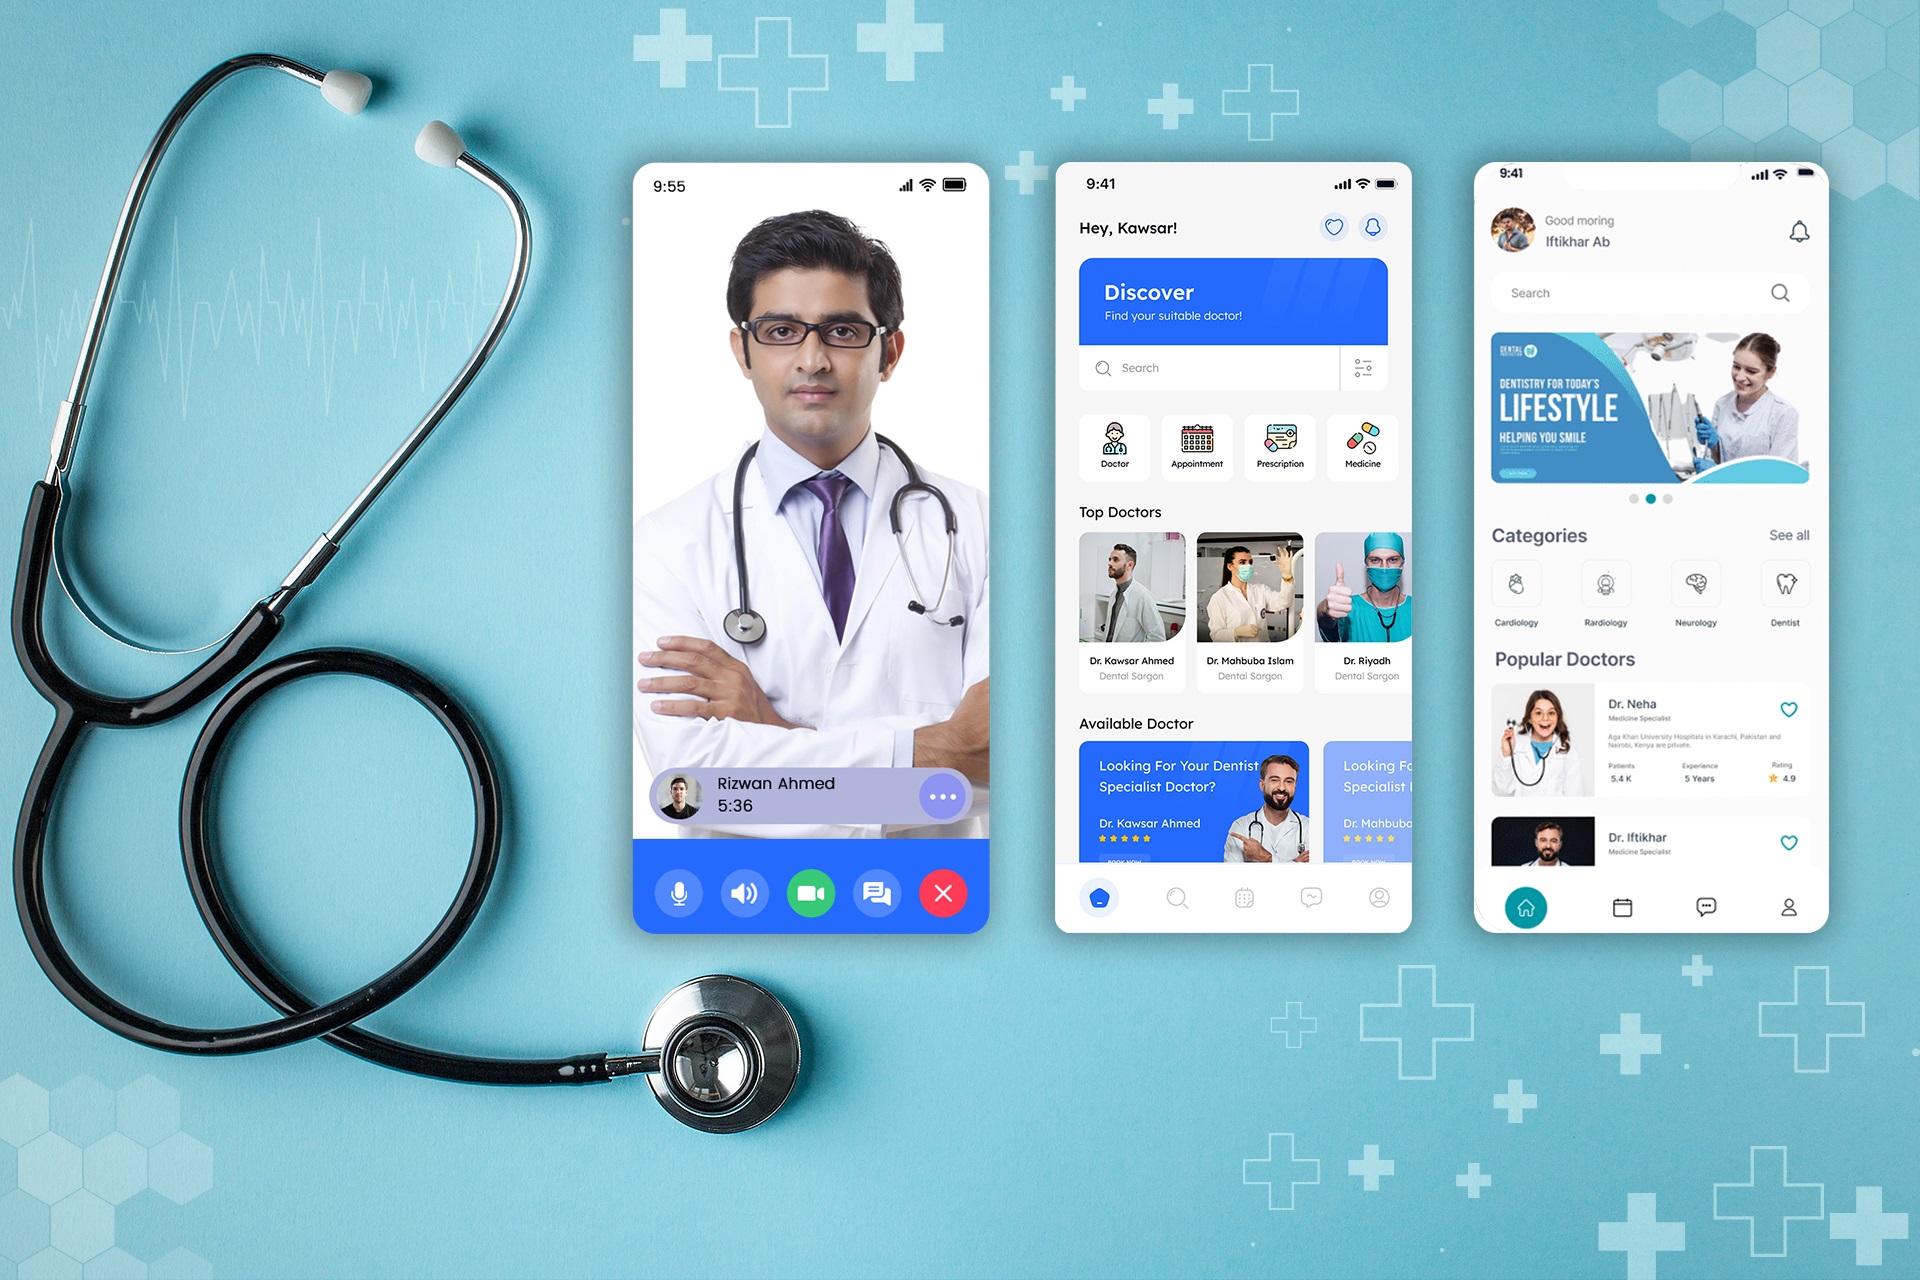 How To Build a Medical Startup? - Appikr Labs